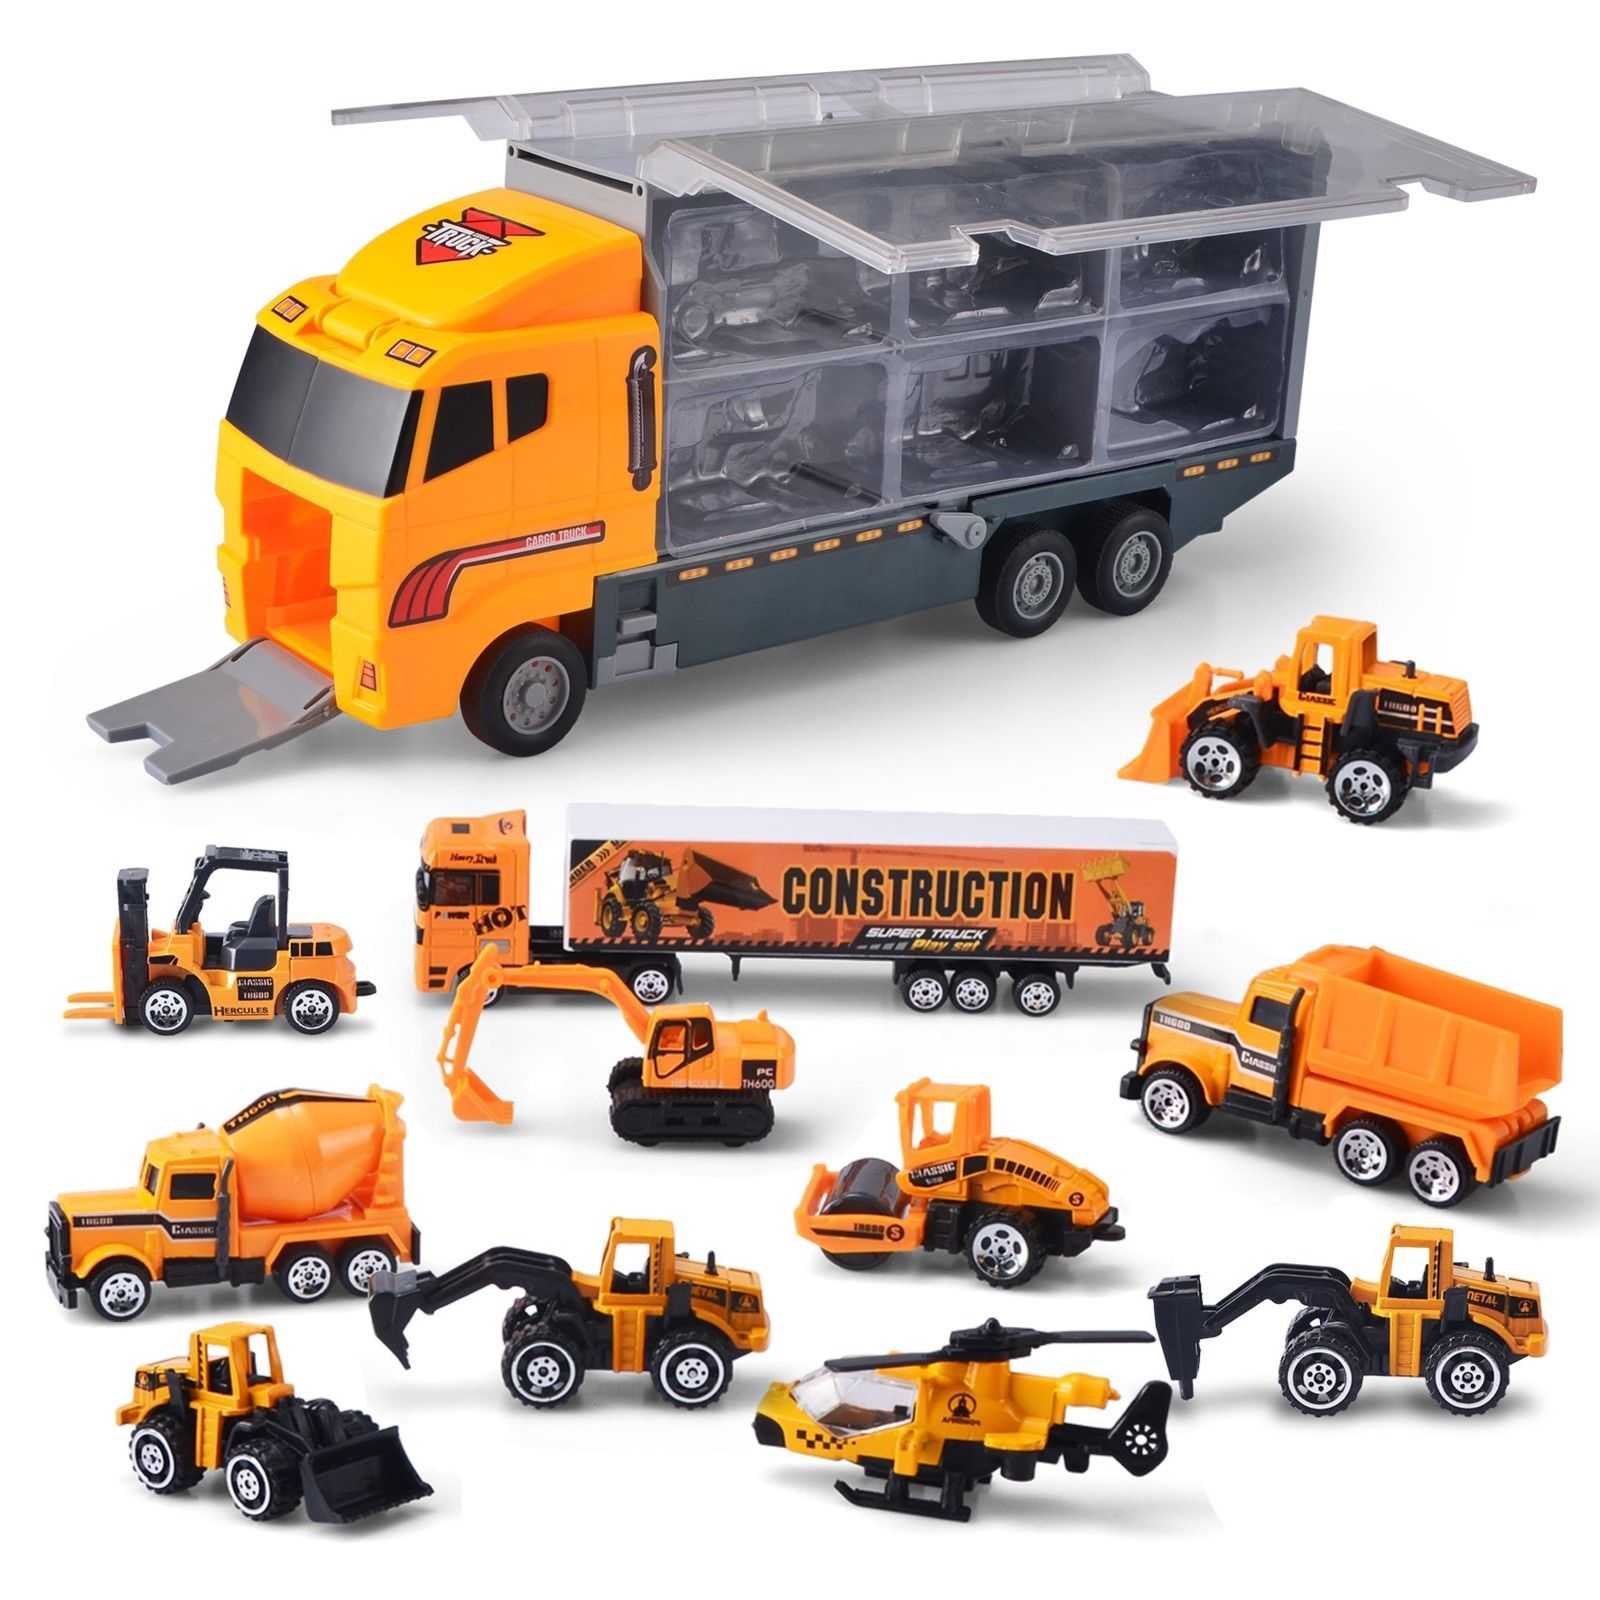 Joyin Toy 11 in 1 Die-cast Construction and 50 similar items